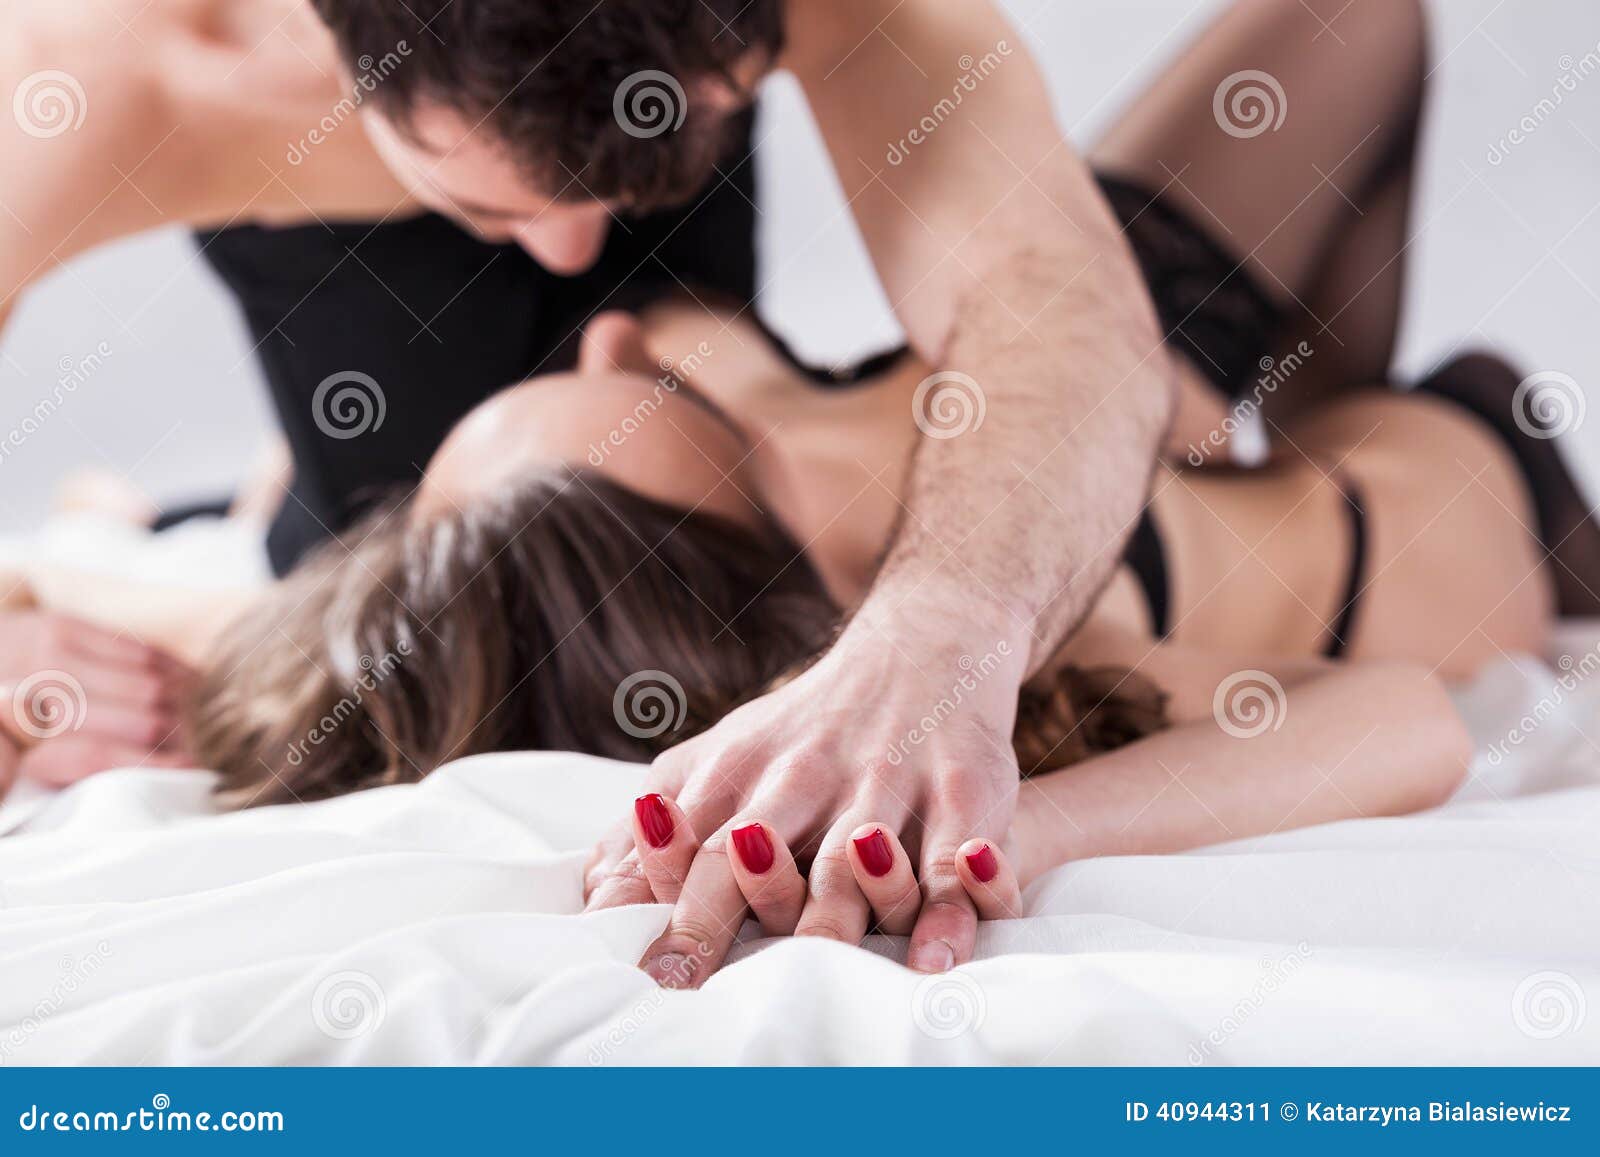 images of intercourse